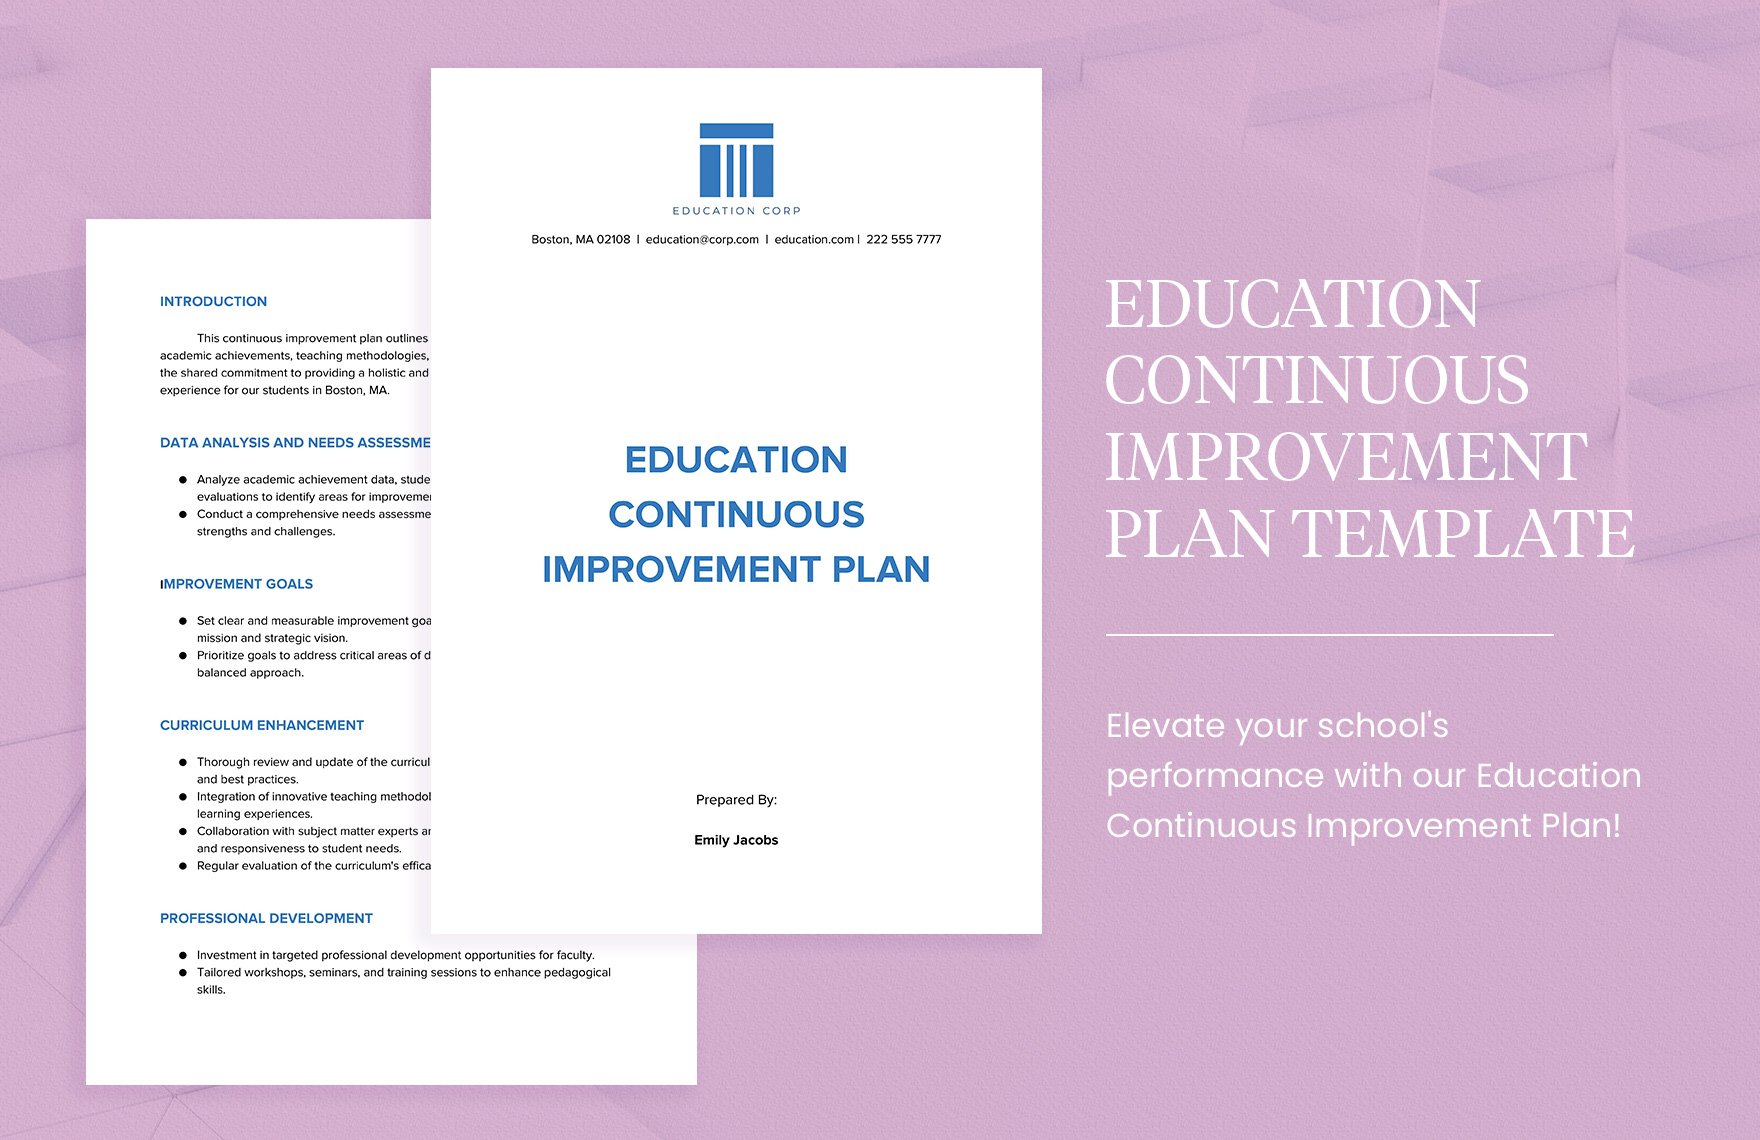 Education Continuous Improvement Plan Template in Word, Google Docs, PDF